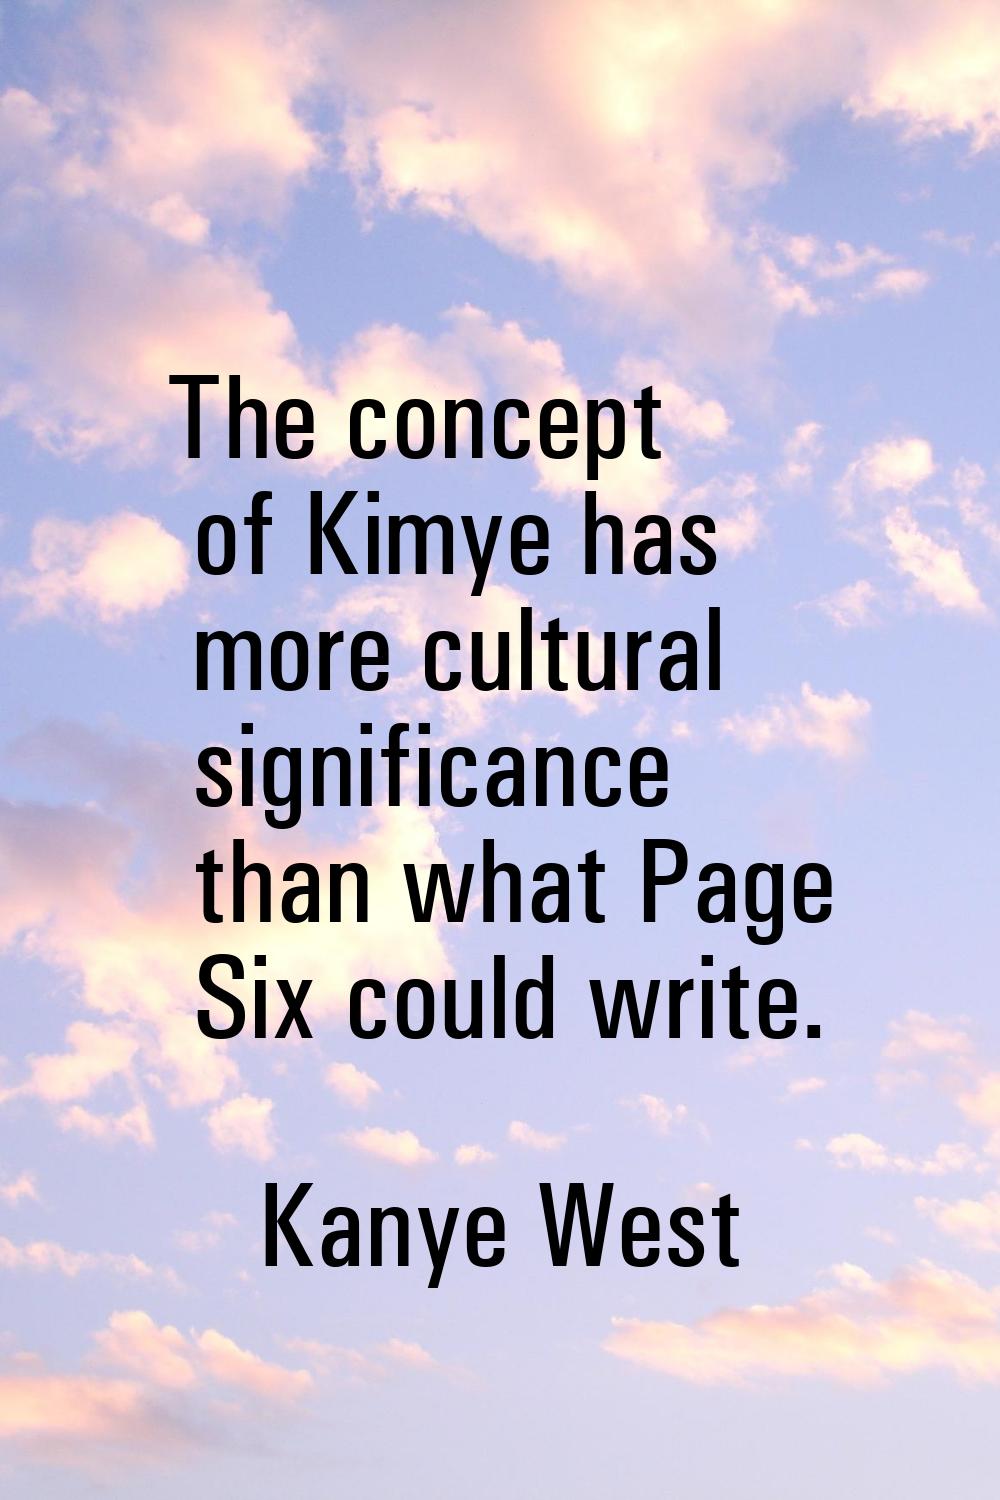 The concept of Kimye has more cultural significance than what Page Six could write.